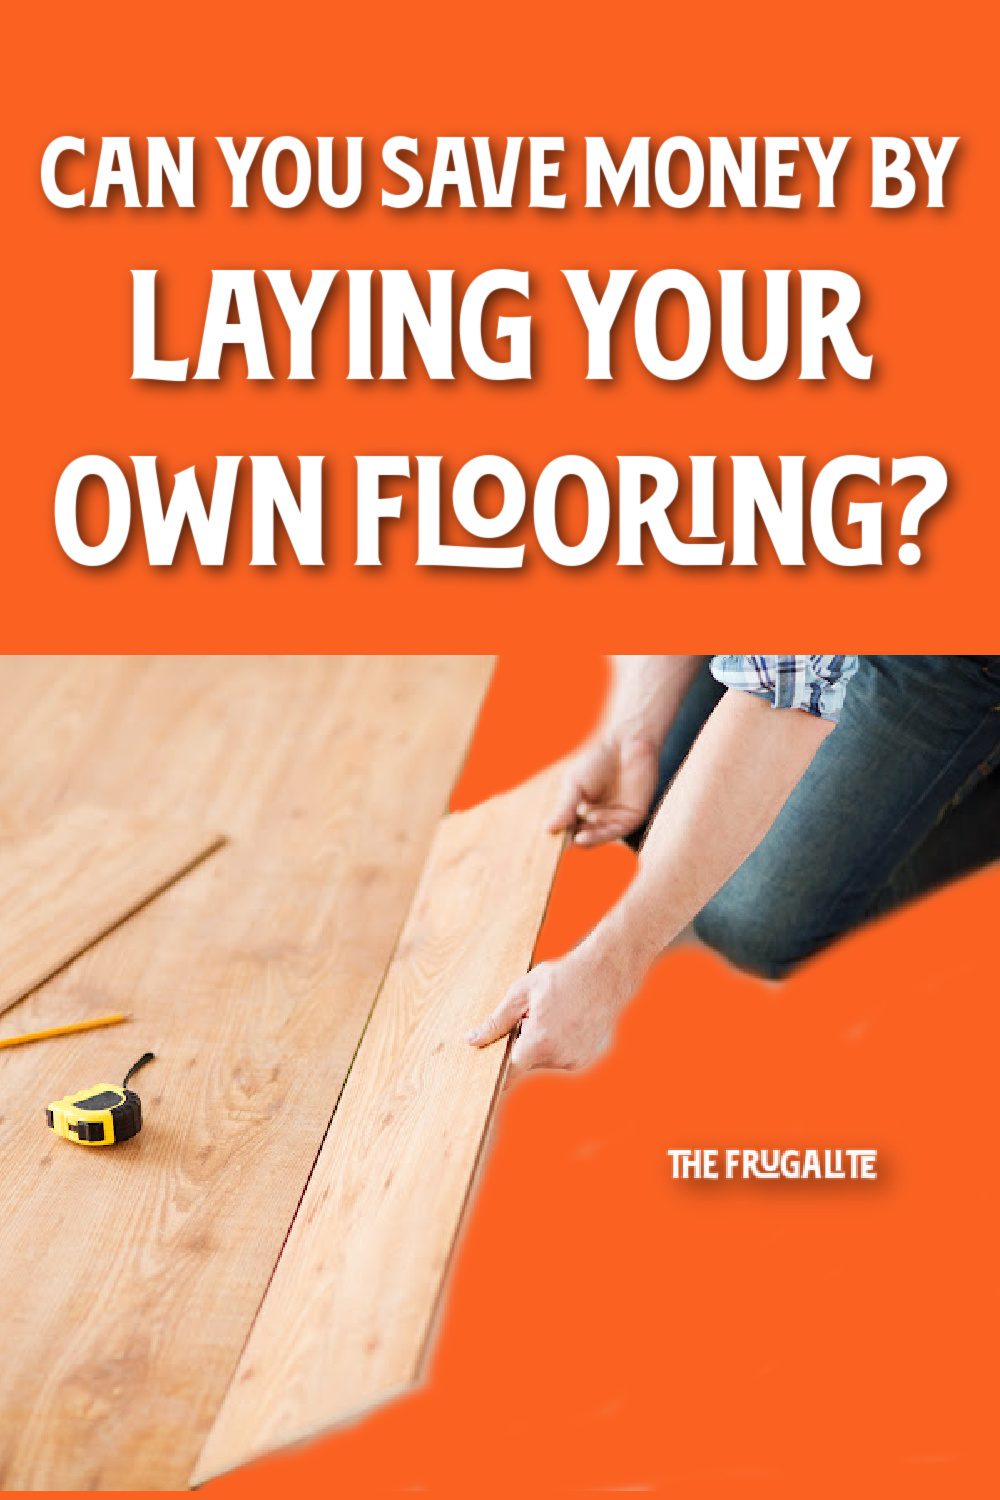 Can You Save Money By Laying Your Own Flooring?